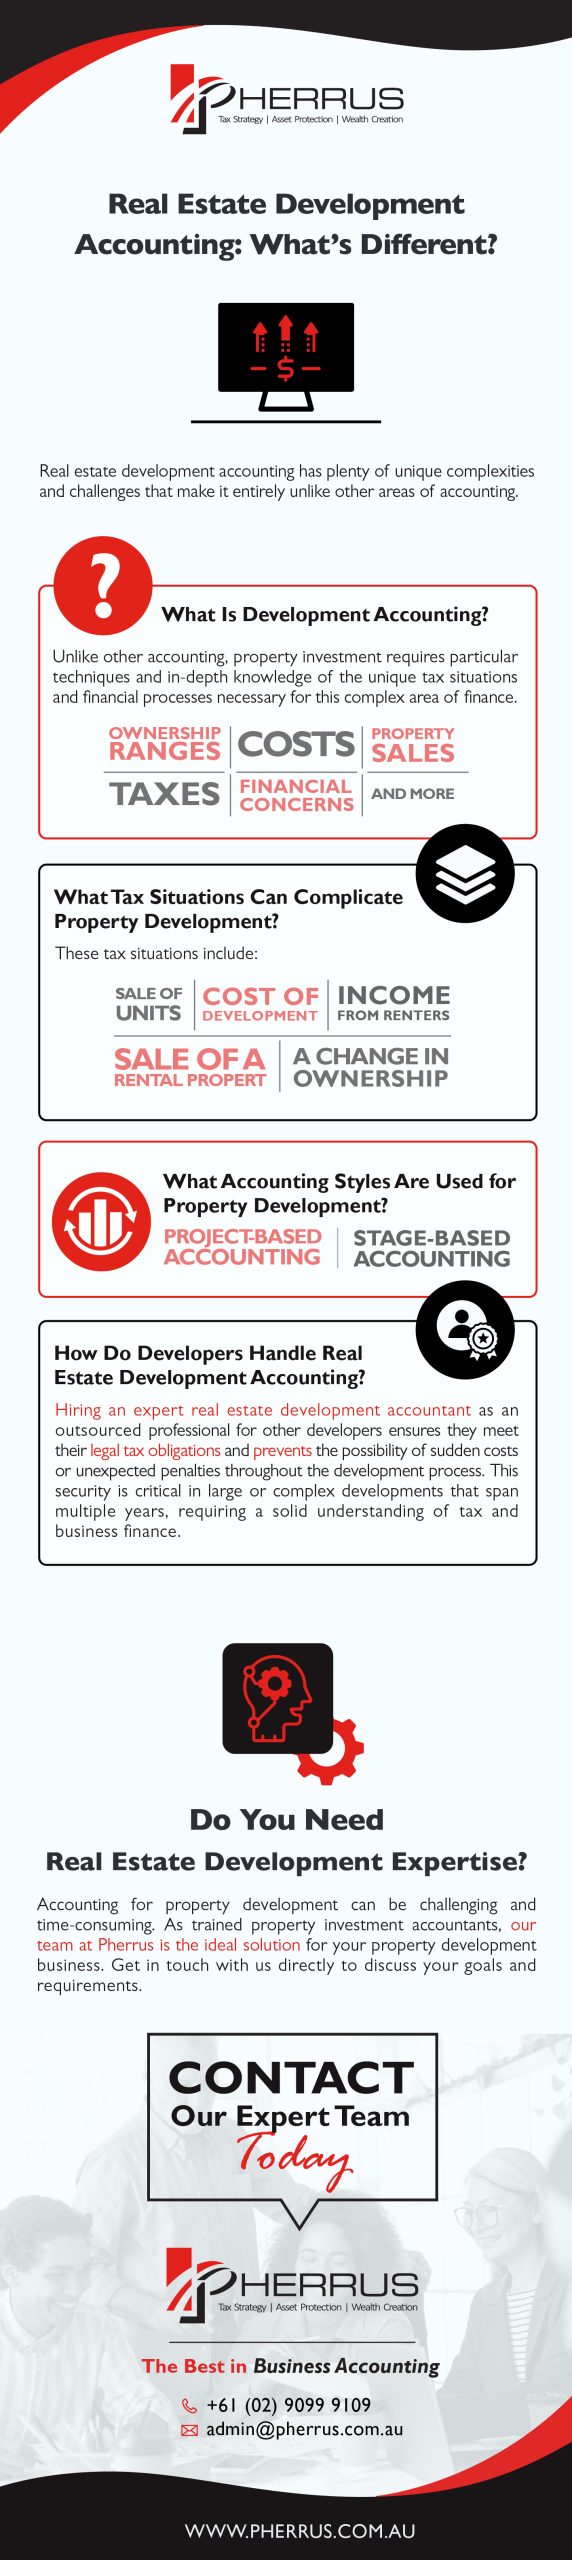 Real Estate Development Accounting infographic